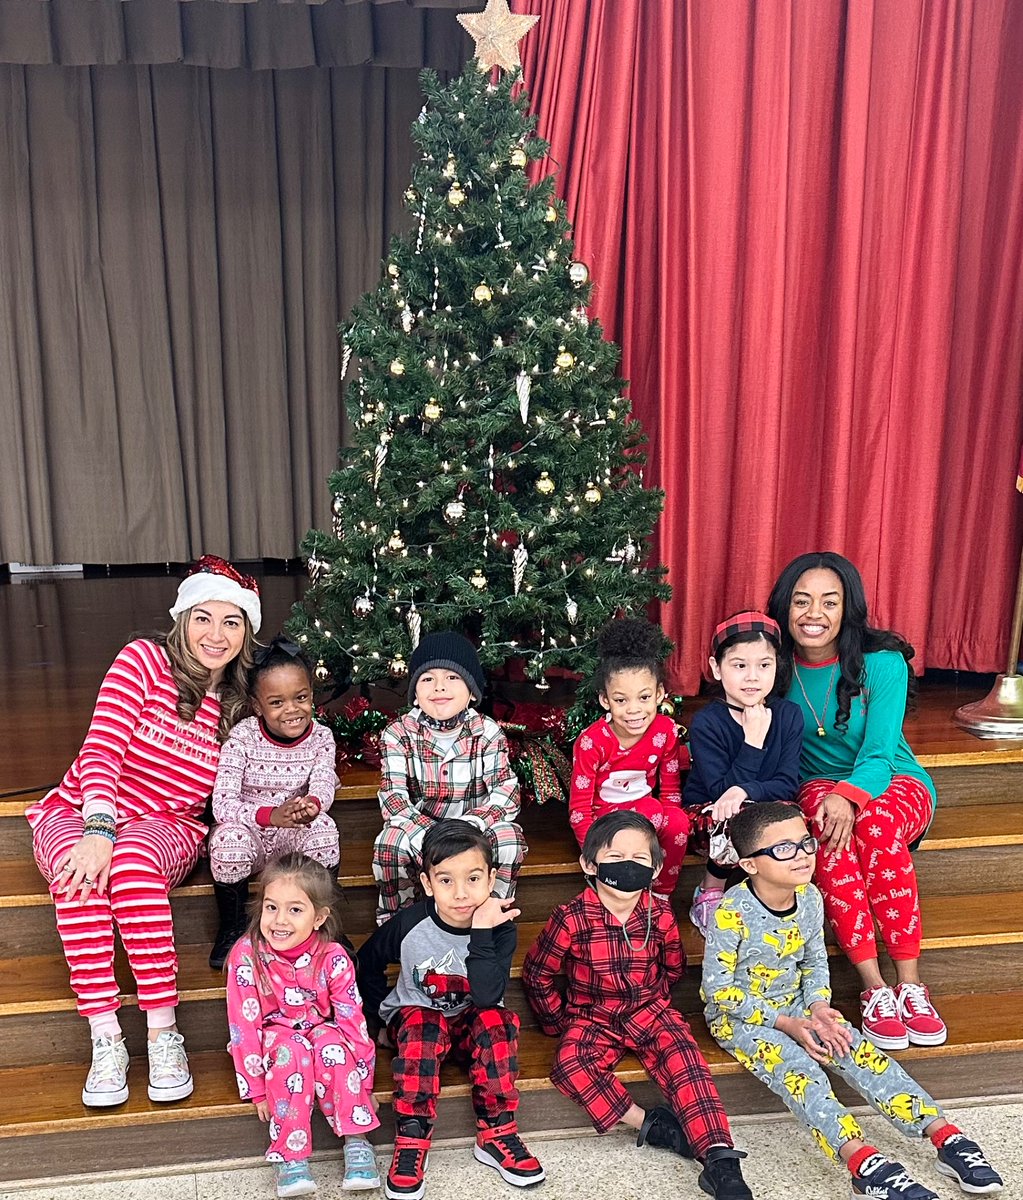 Mustangs 🐴 Celebrating Polar Express Day  w/ Our PJs 🎅🎄🌟
#GreatnessTogether♥️ #AldineConnected #PowerofPrimary